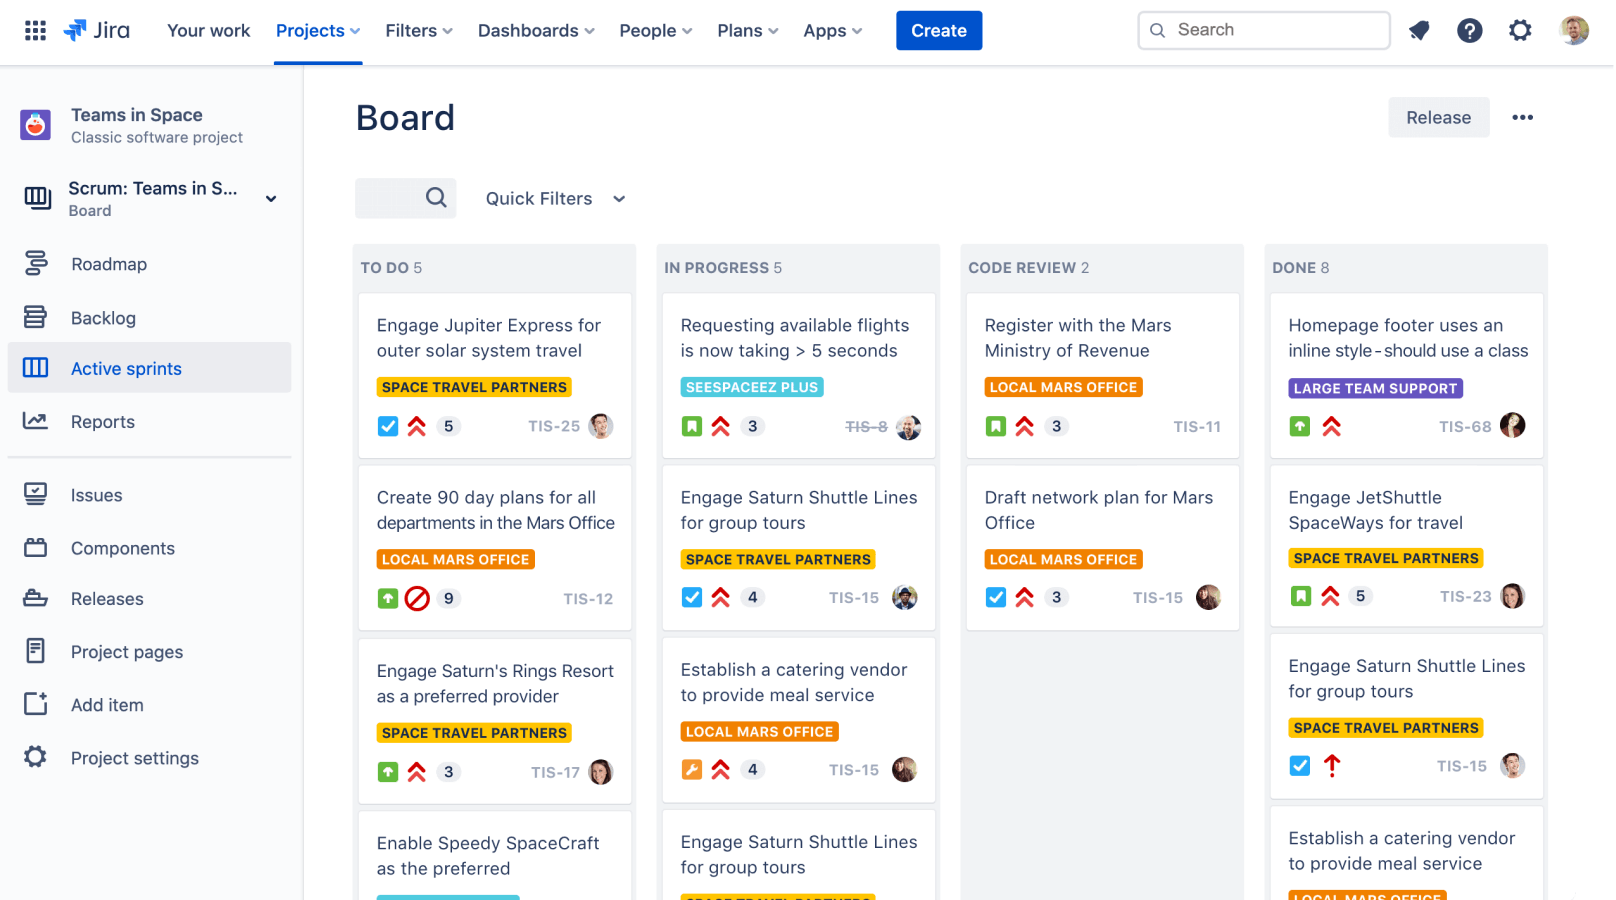 Why look for Jira Alternatives? #1 Reason: Clunky and outdated UI